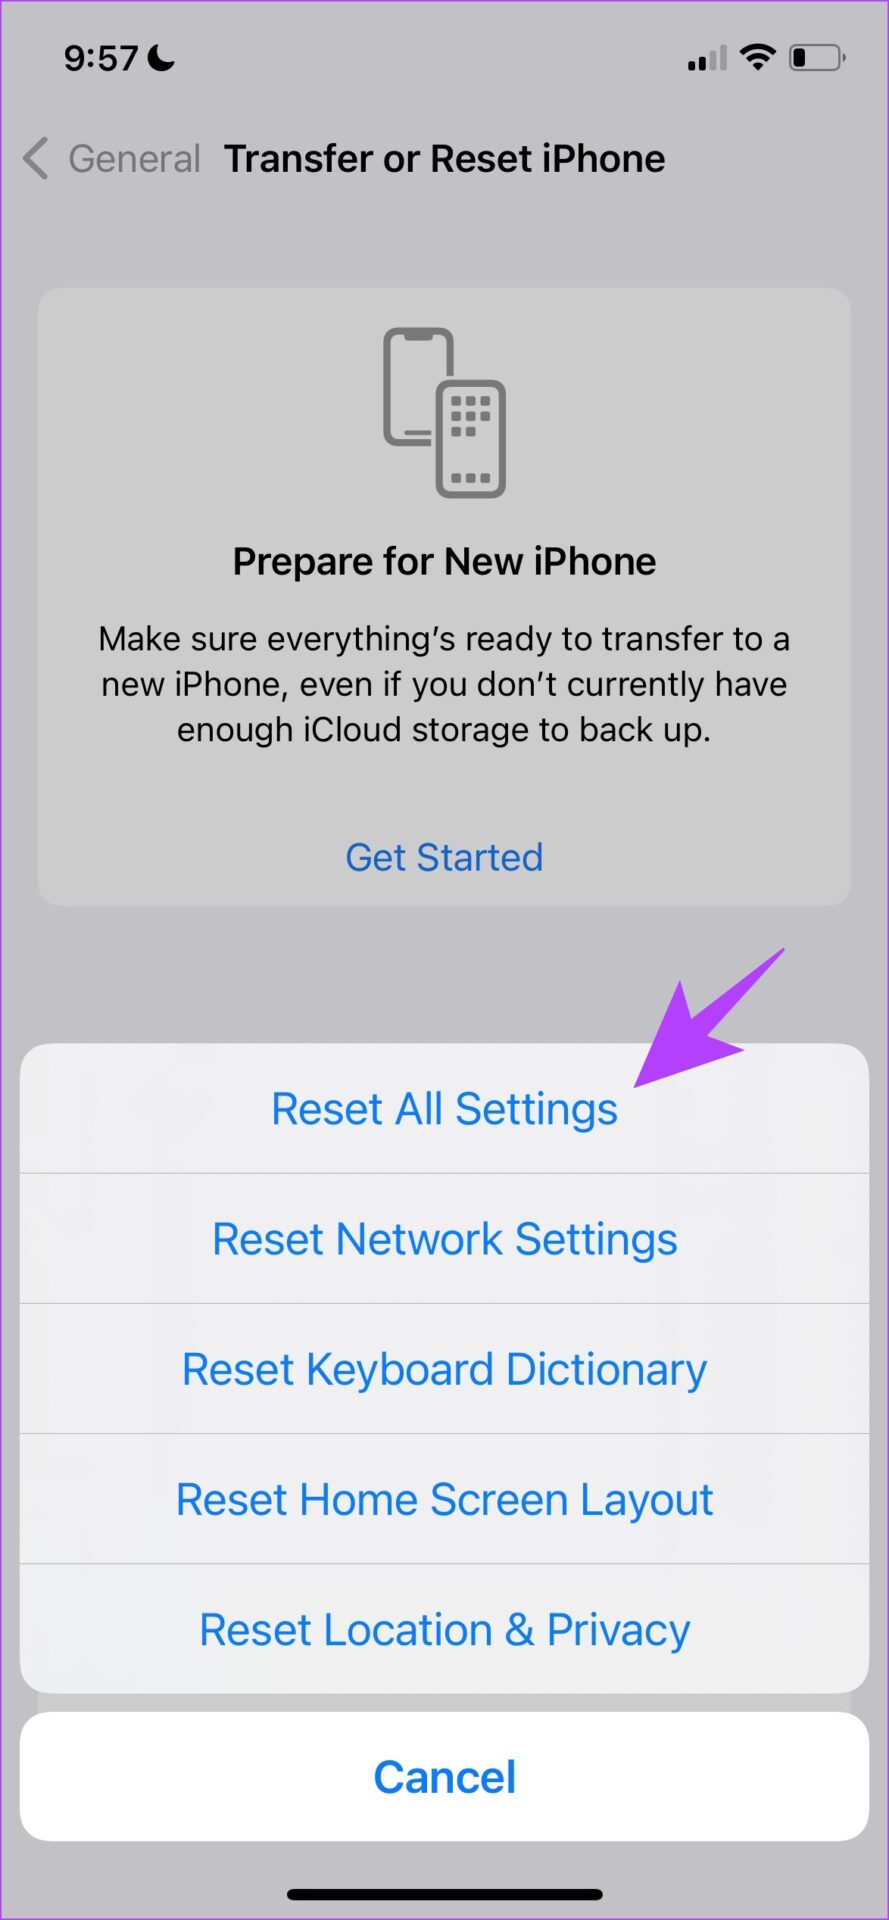 Select Reset All Settings on iPhone